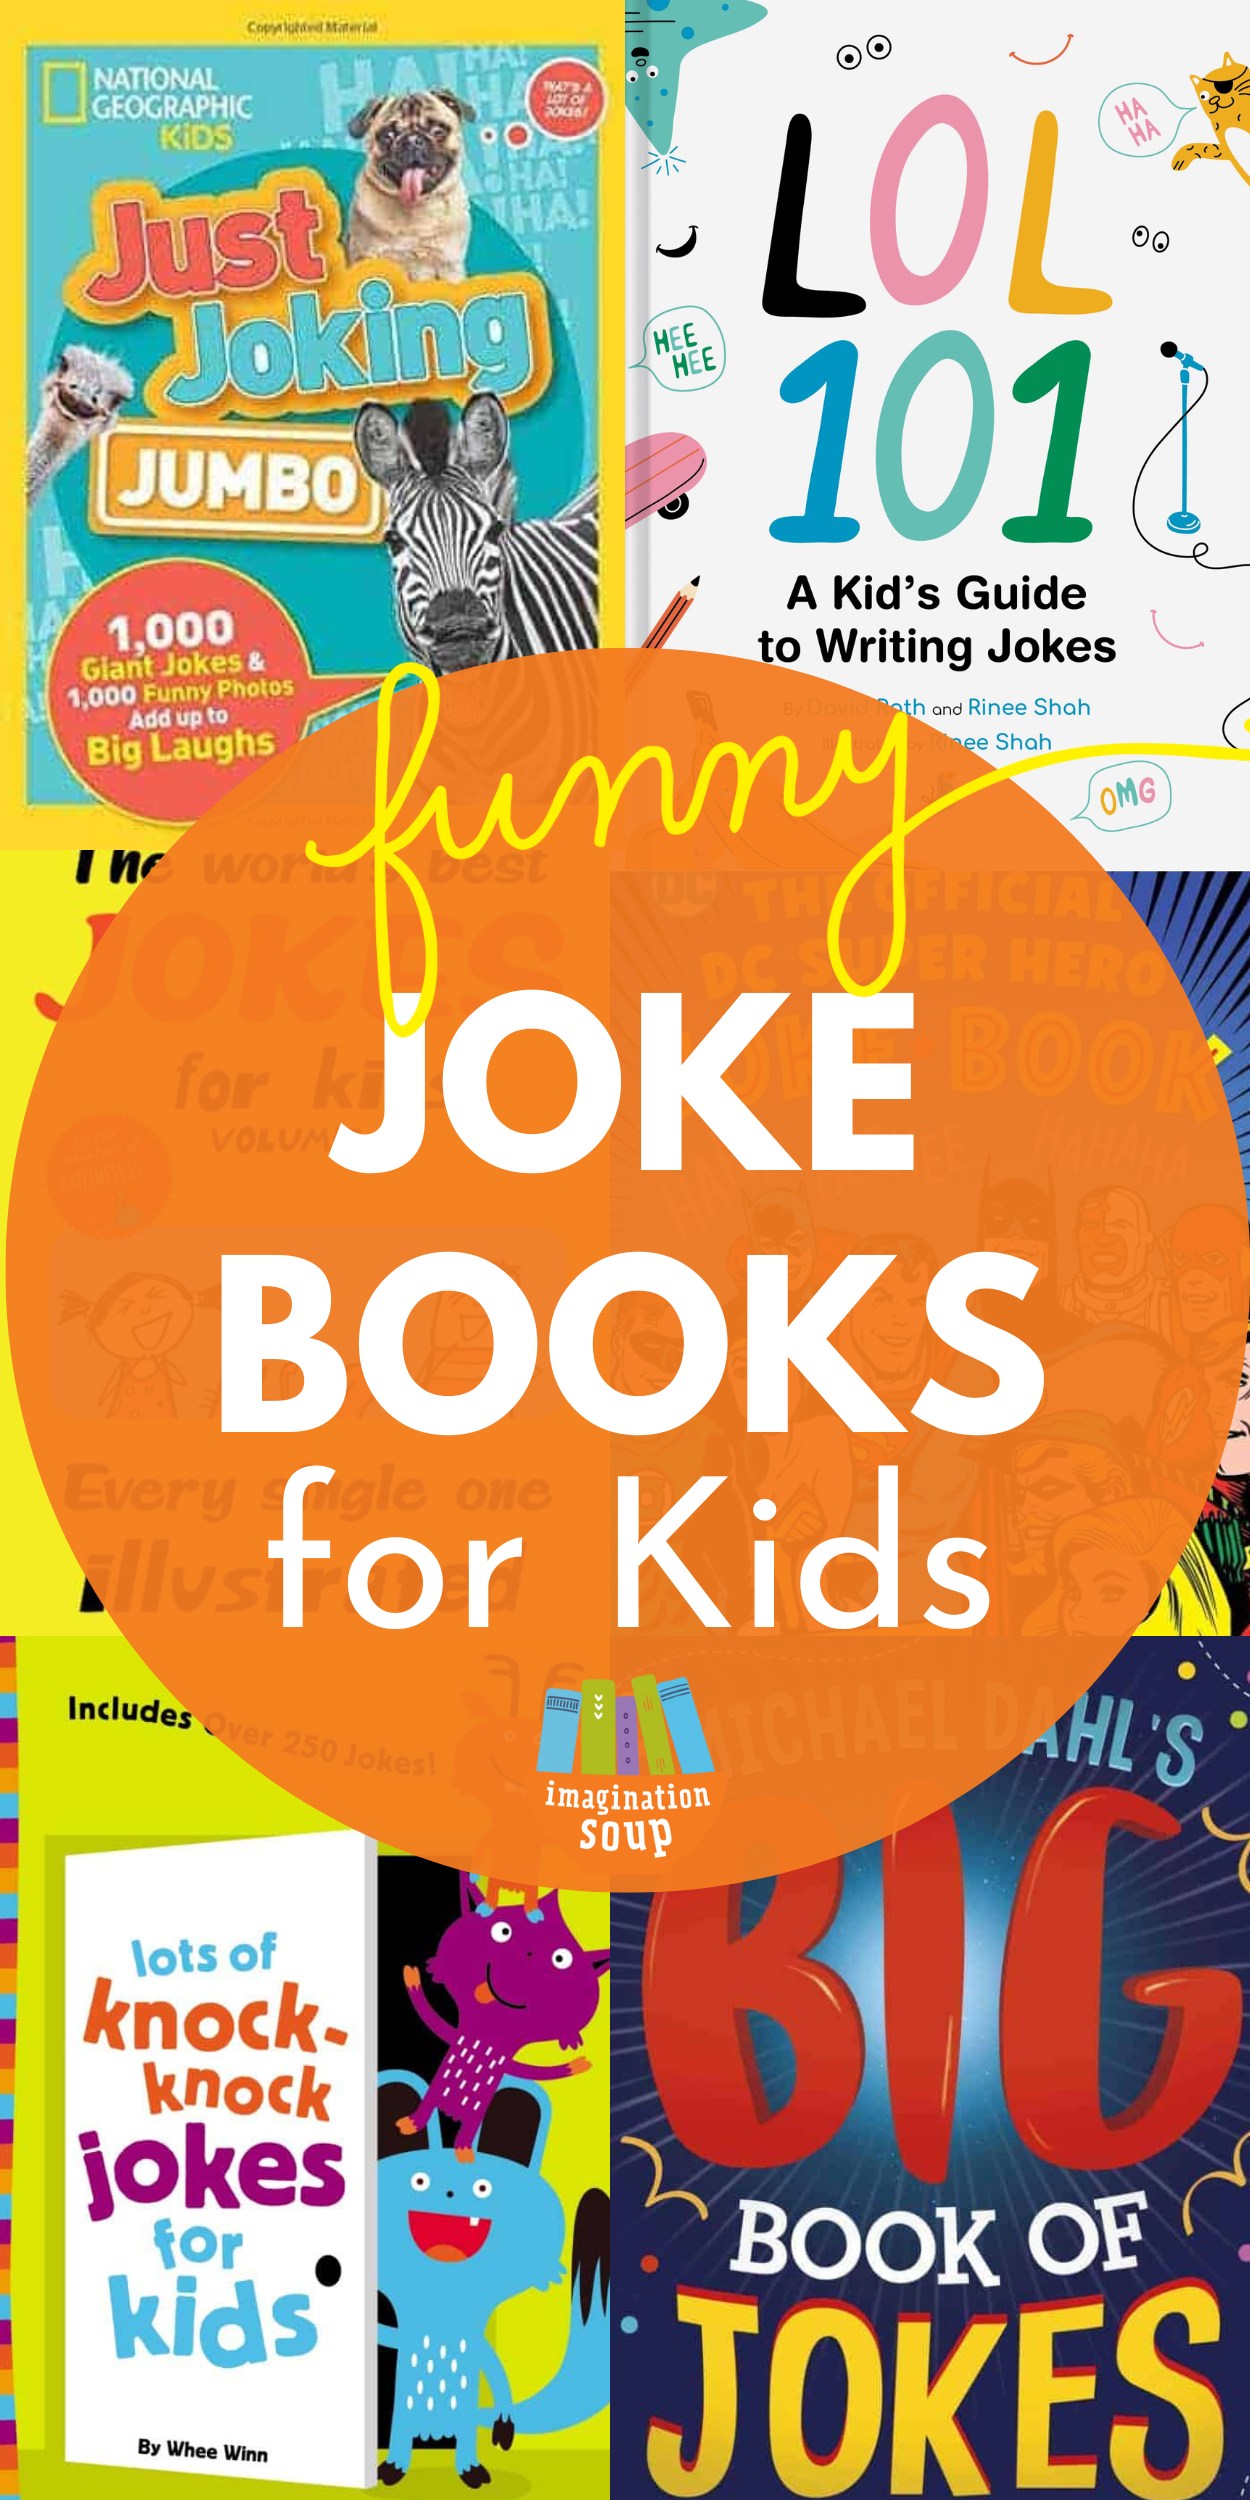 If you're looking for the best jokes for kids, a joke a day, you can find a collection of kid-friendly funny jokes (puns, knock-knock jokes, riddles, holiday jokes, animal jokes, and more) in these best nonfiction joke book collections!